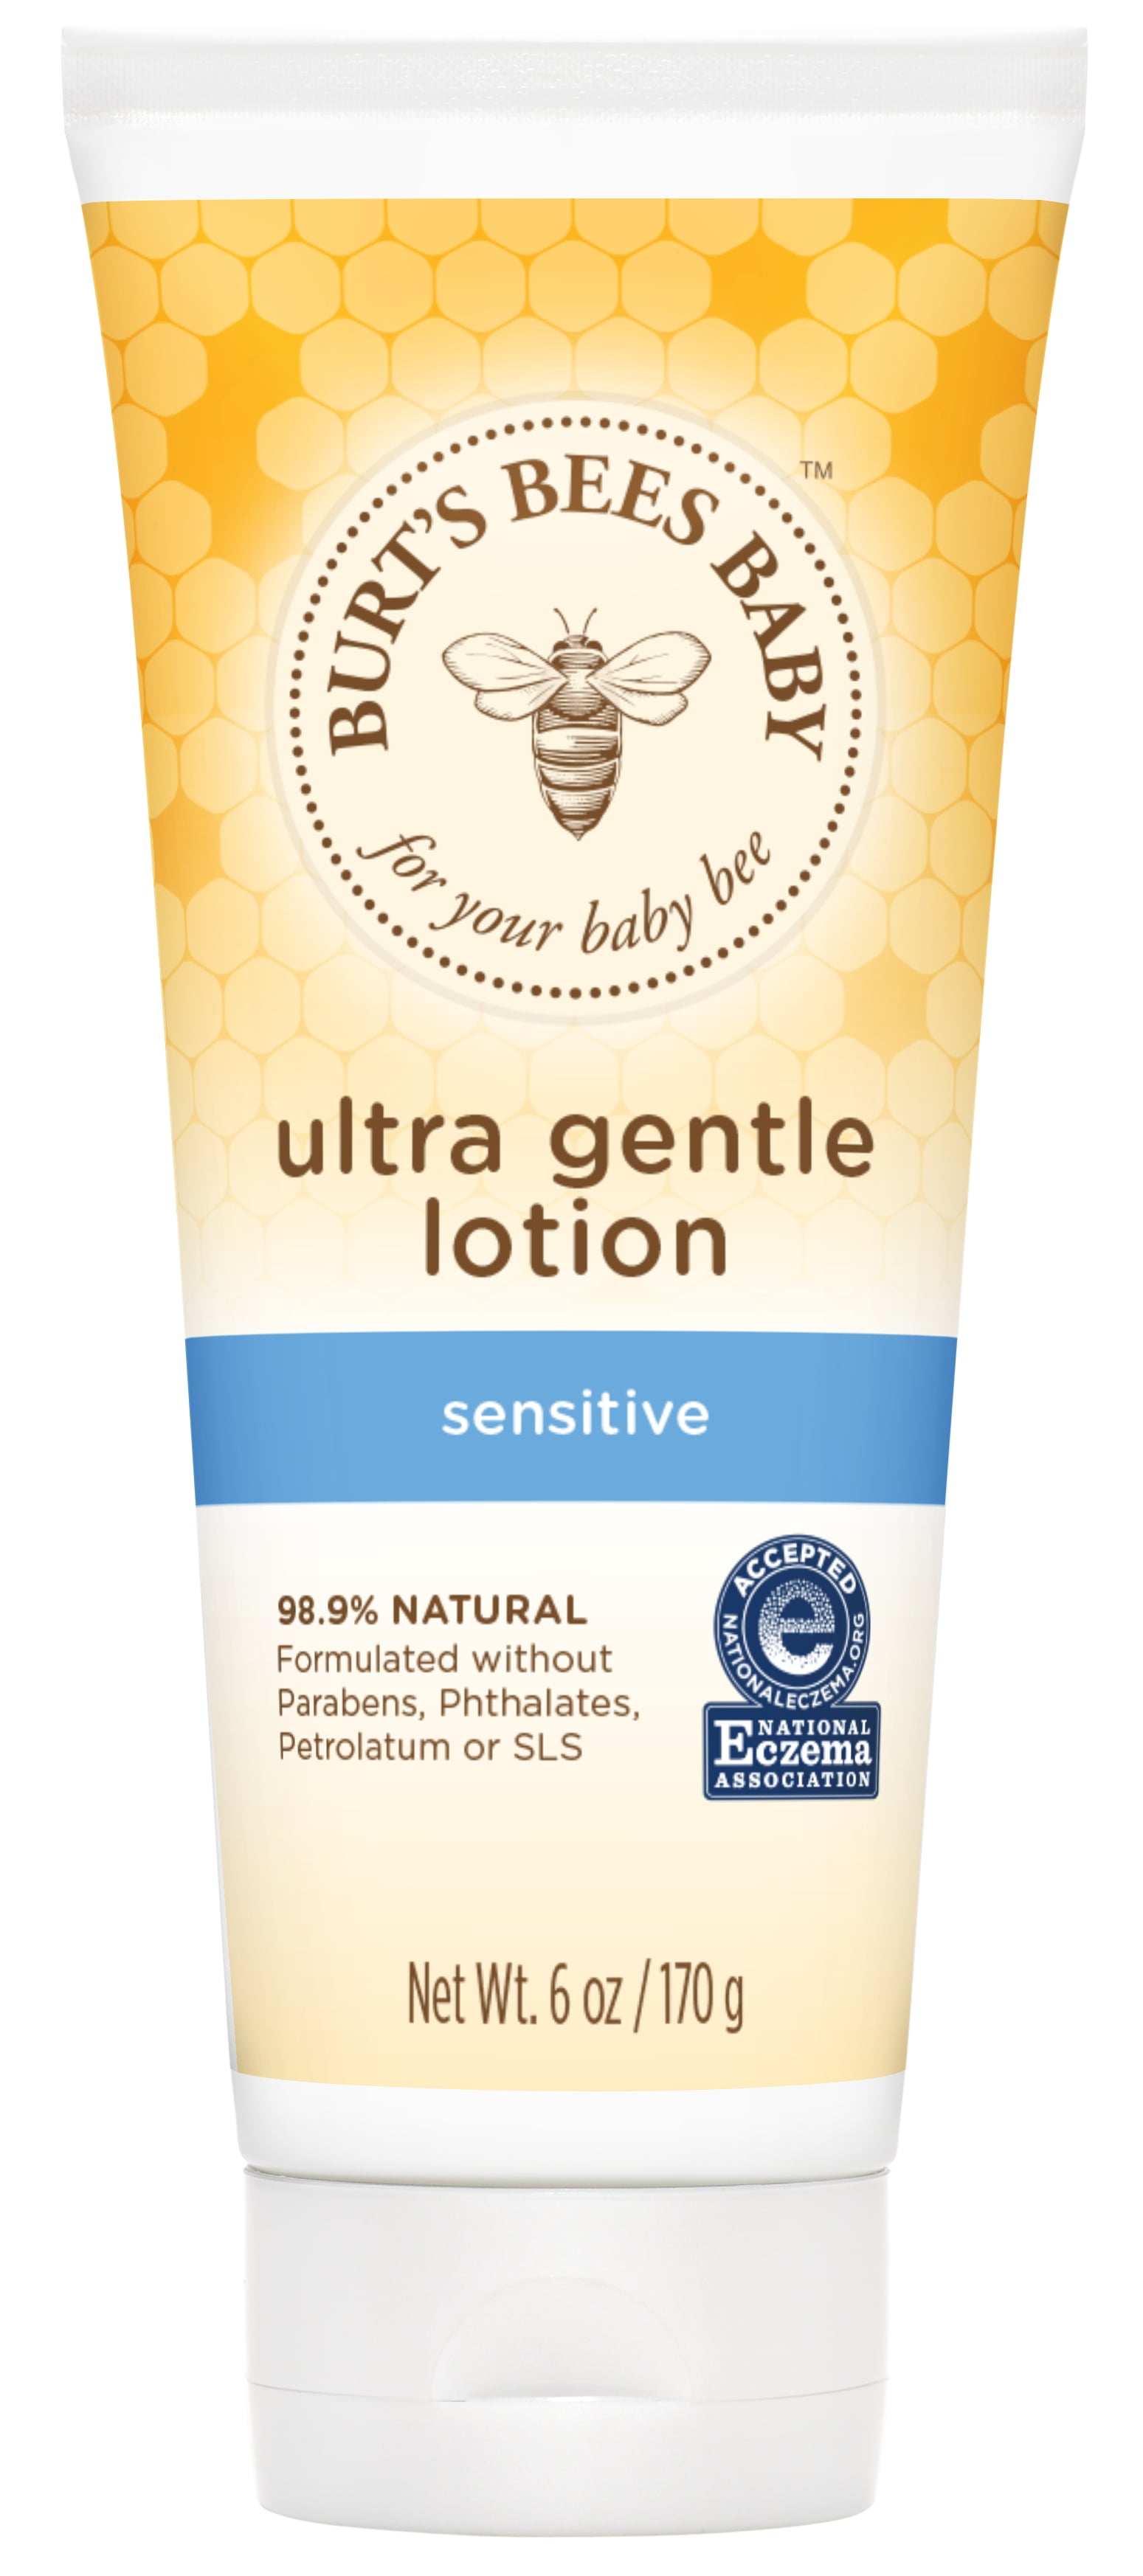 Bees Baby Gentle Lotion for Skin, 6 oz - Walmart.com